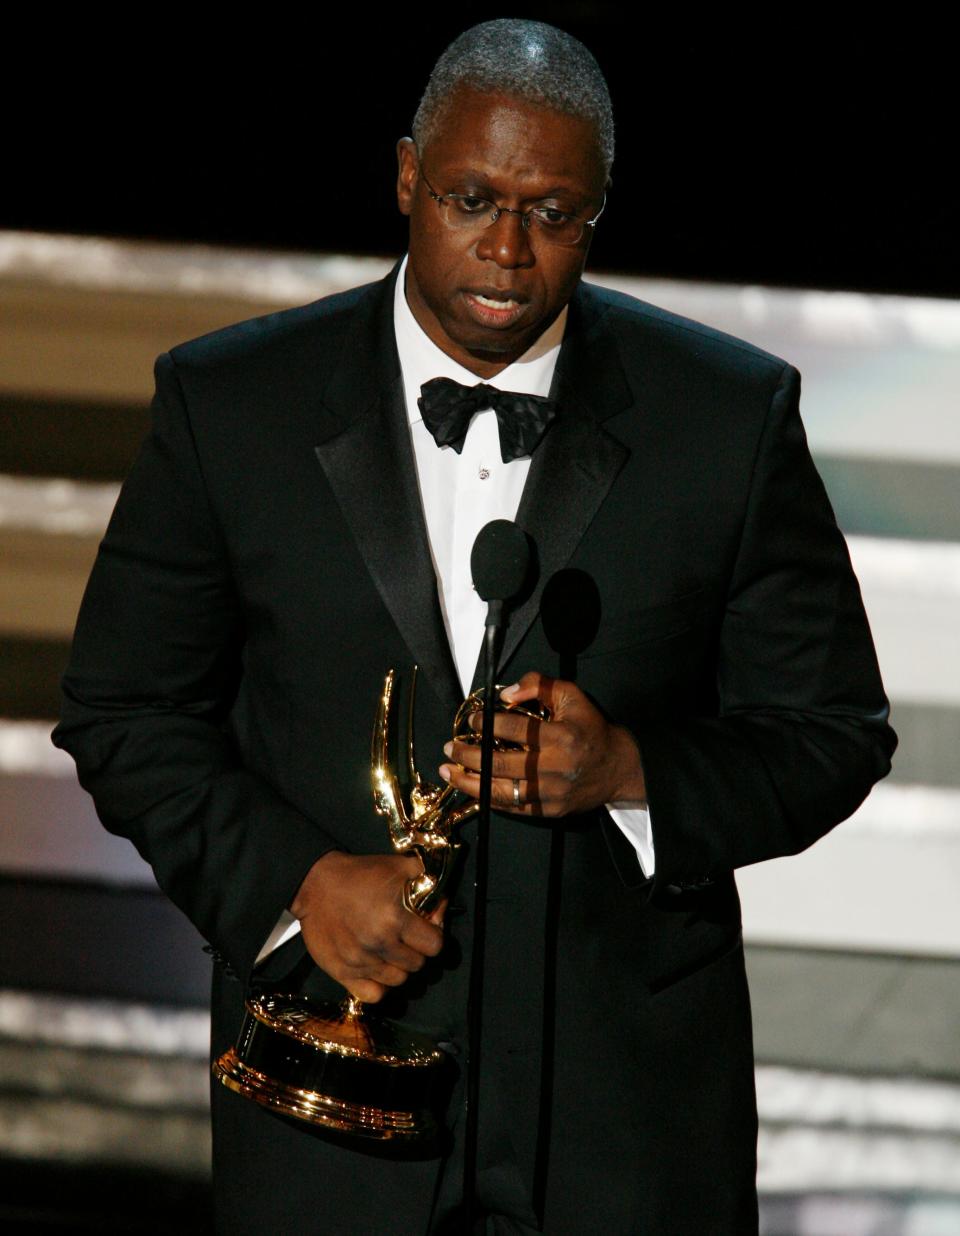 André Braugher was nominated for 11 Emmy Awards and won two in his lifetime. Here, he accepts the award for outstanding lead actor in a miniseries or a movie for his work on the 2006 miniseries "Thief" at the 58th Annual Primetime Emmy Awards.